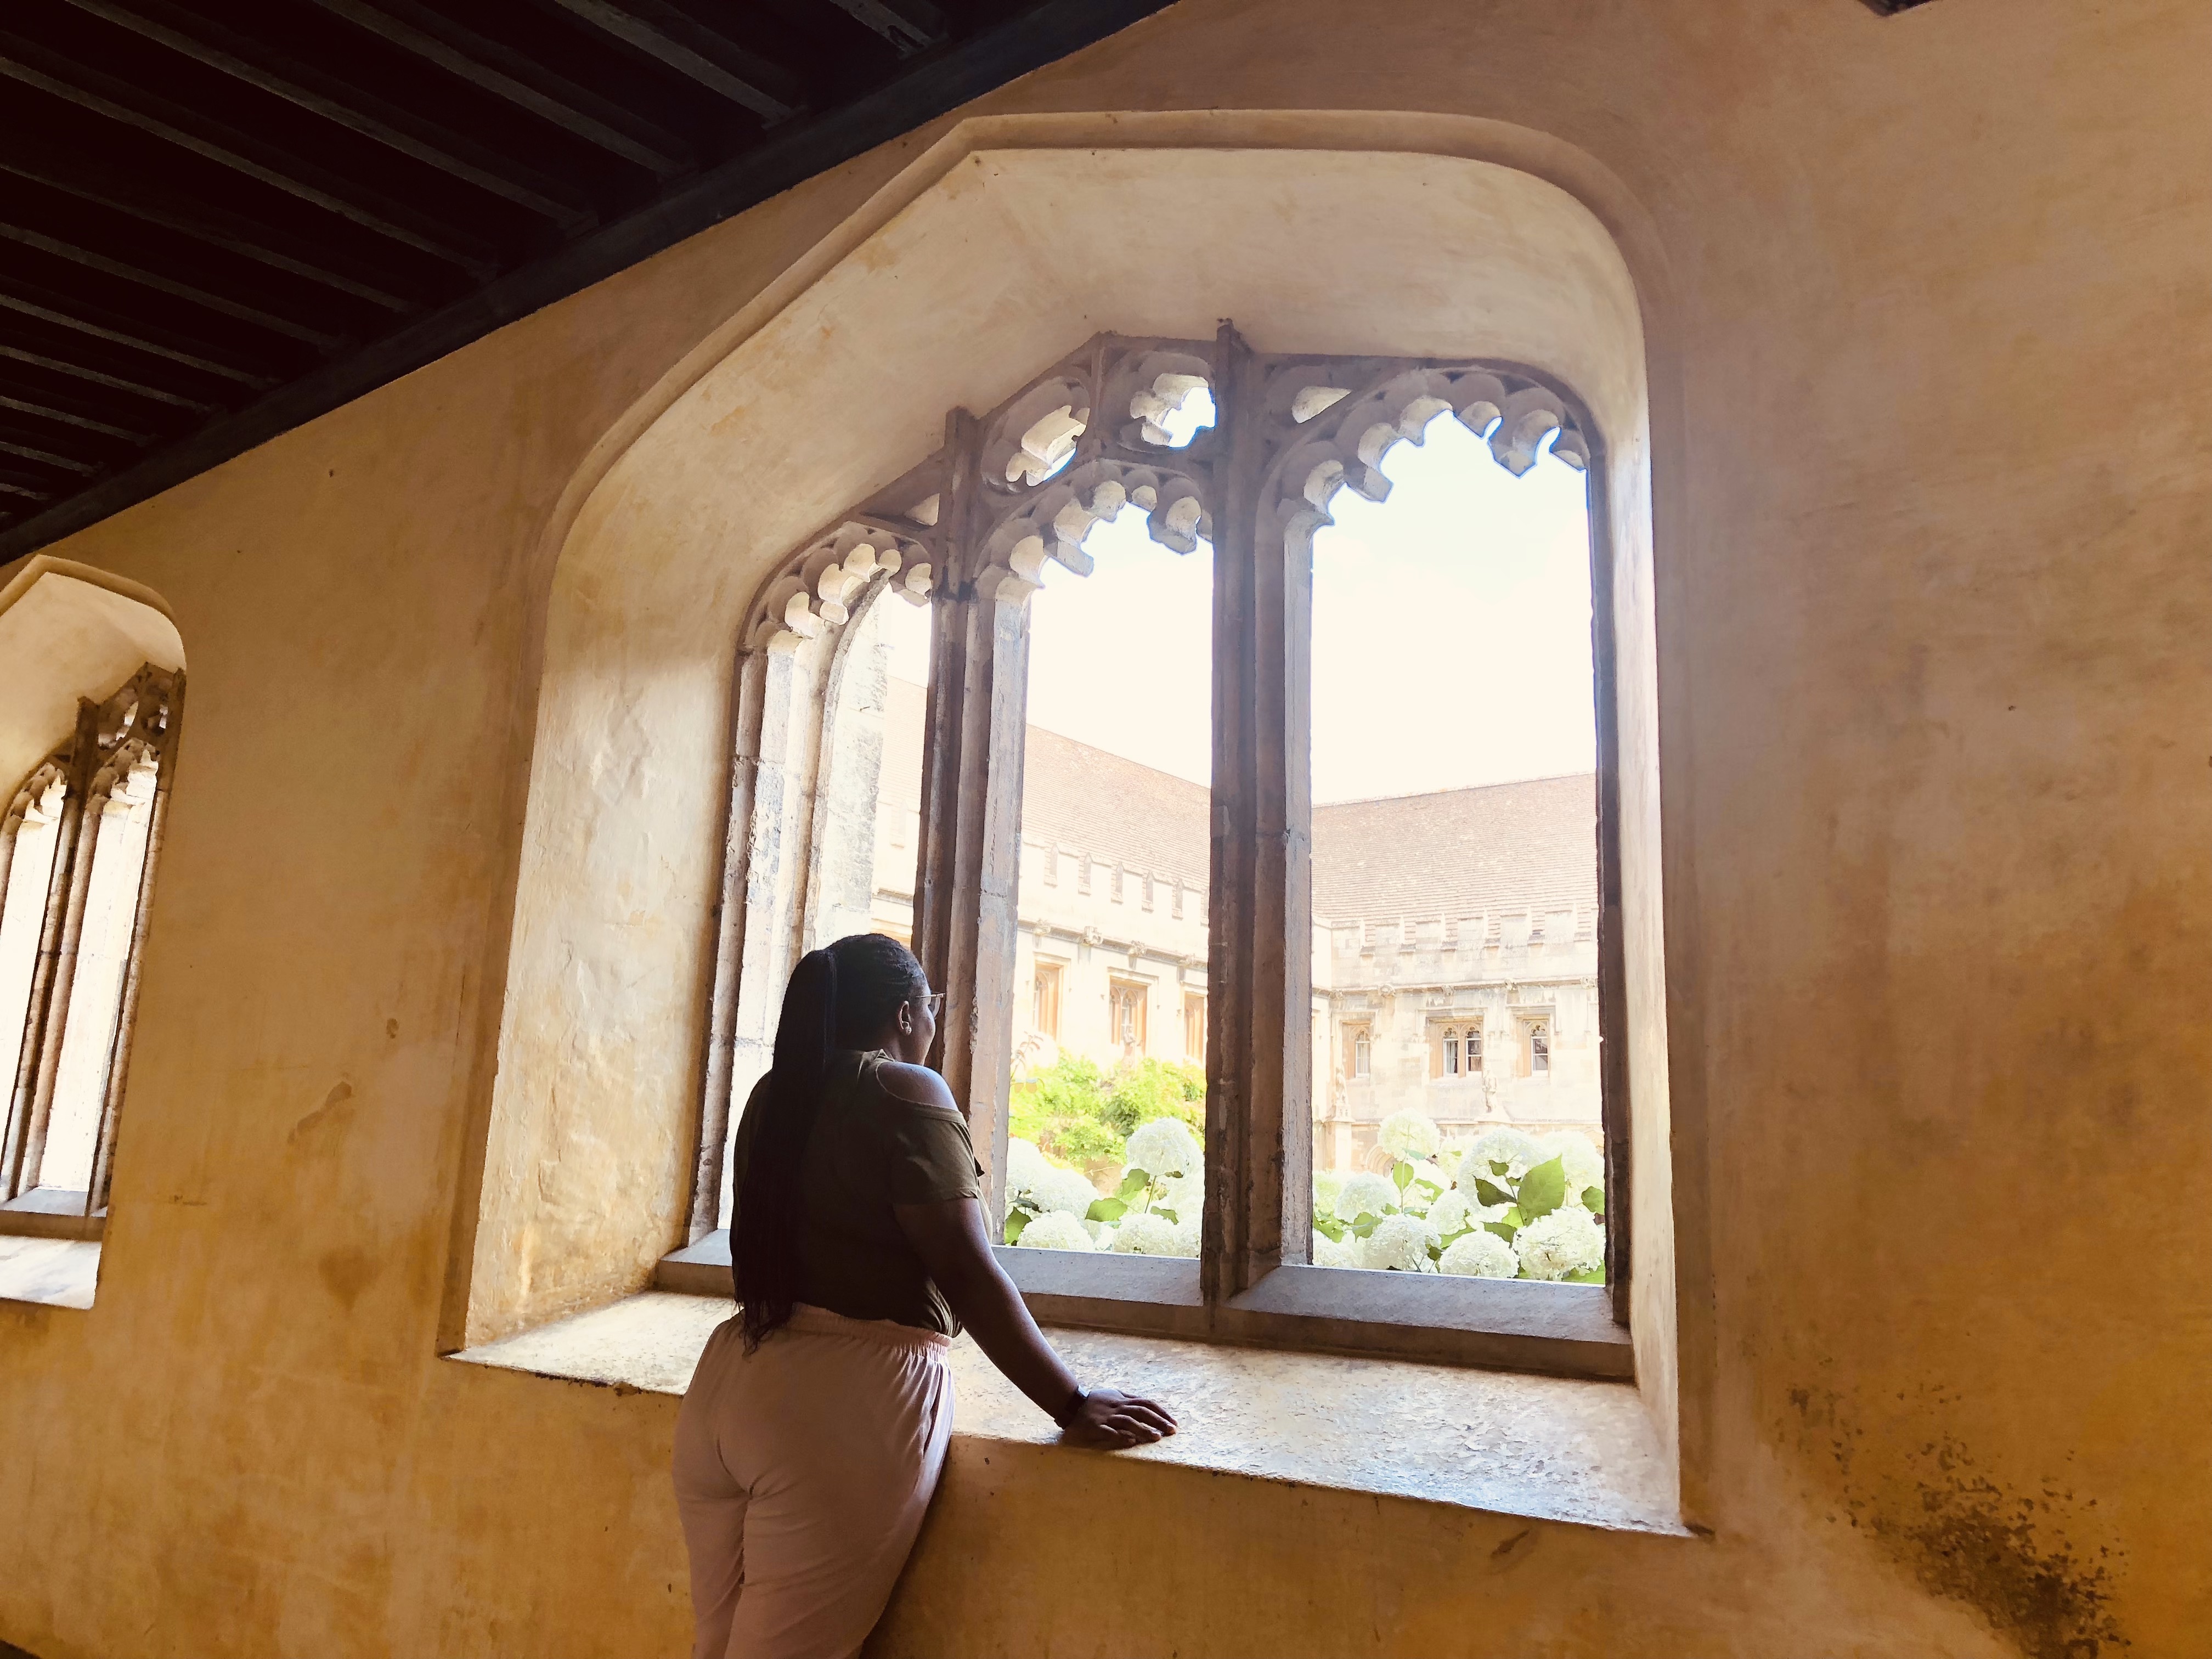 Drey admiring view at Oxford University as break from her summer study abroad in France.